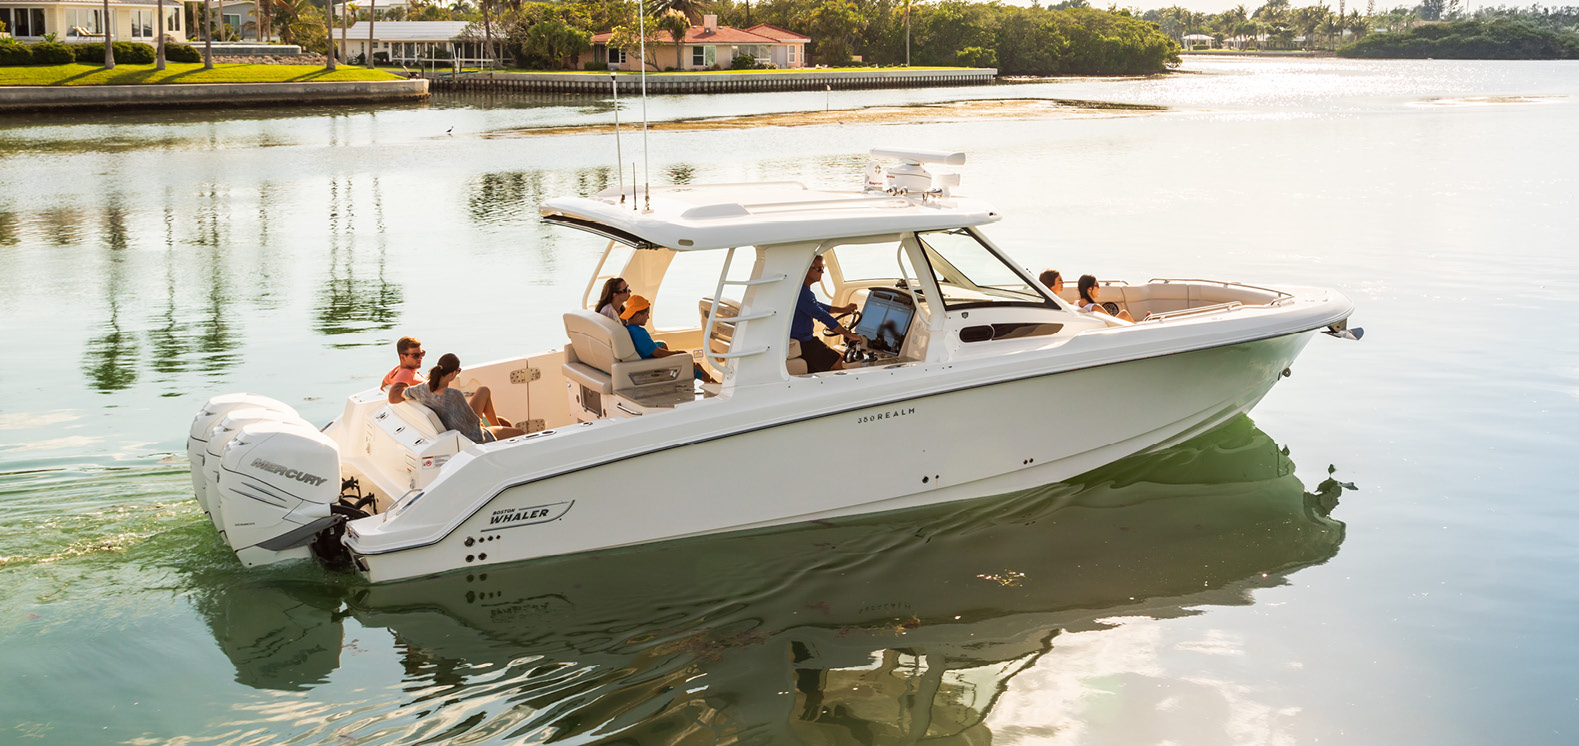 Boston Whaler realm in the water